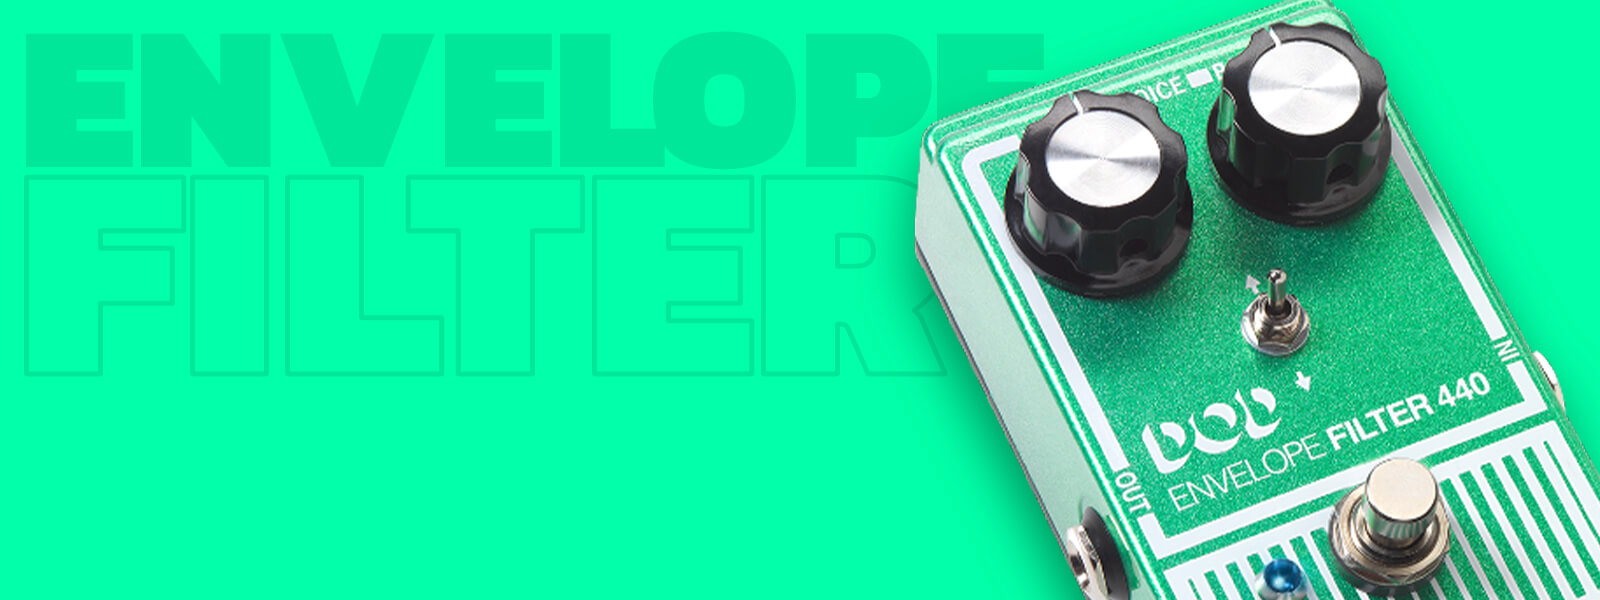 DOD Envelope Filter 440 guitar pedal in grainy green with white graphics, green background and graphics that says 